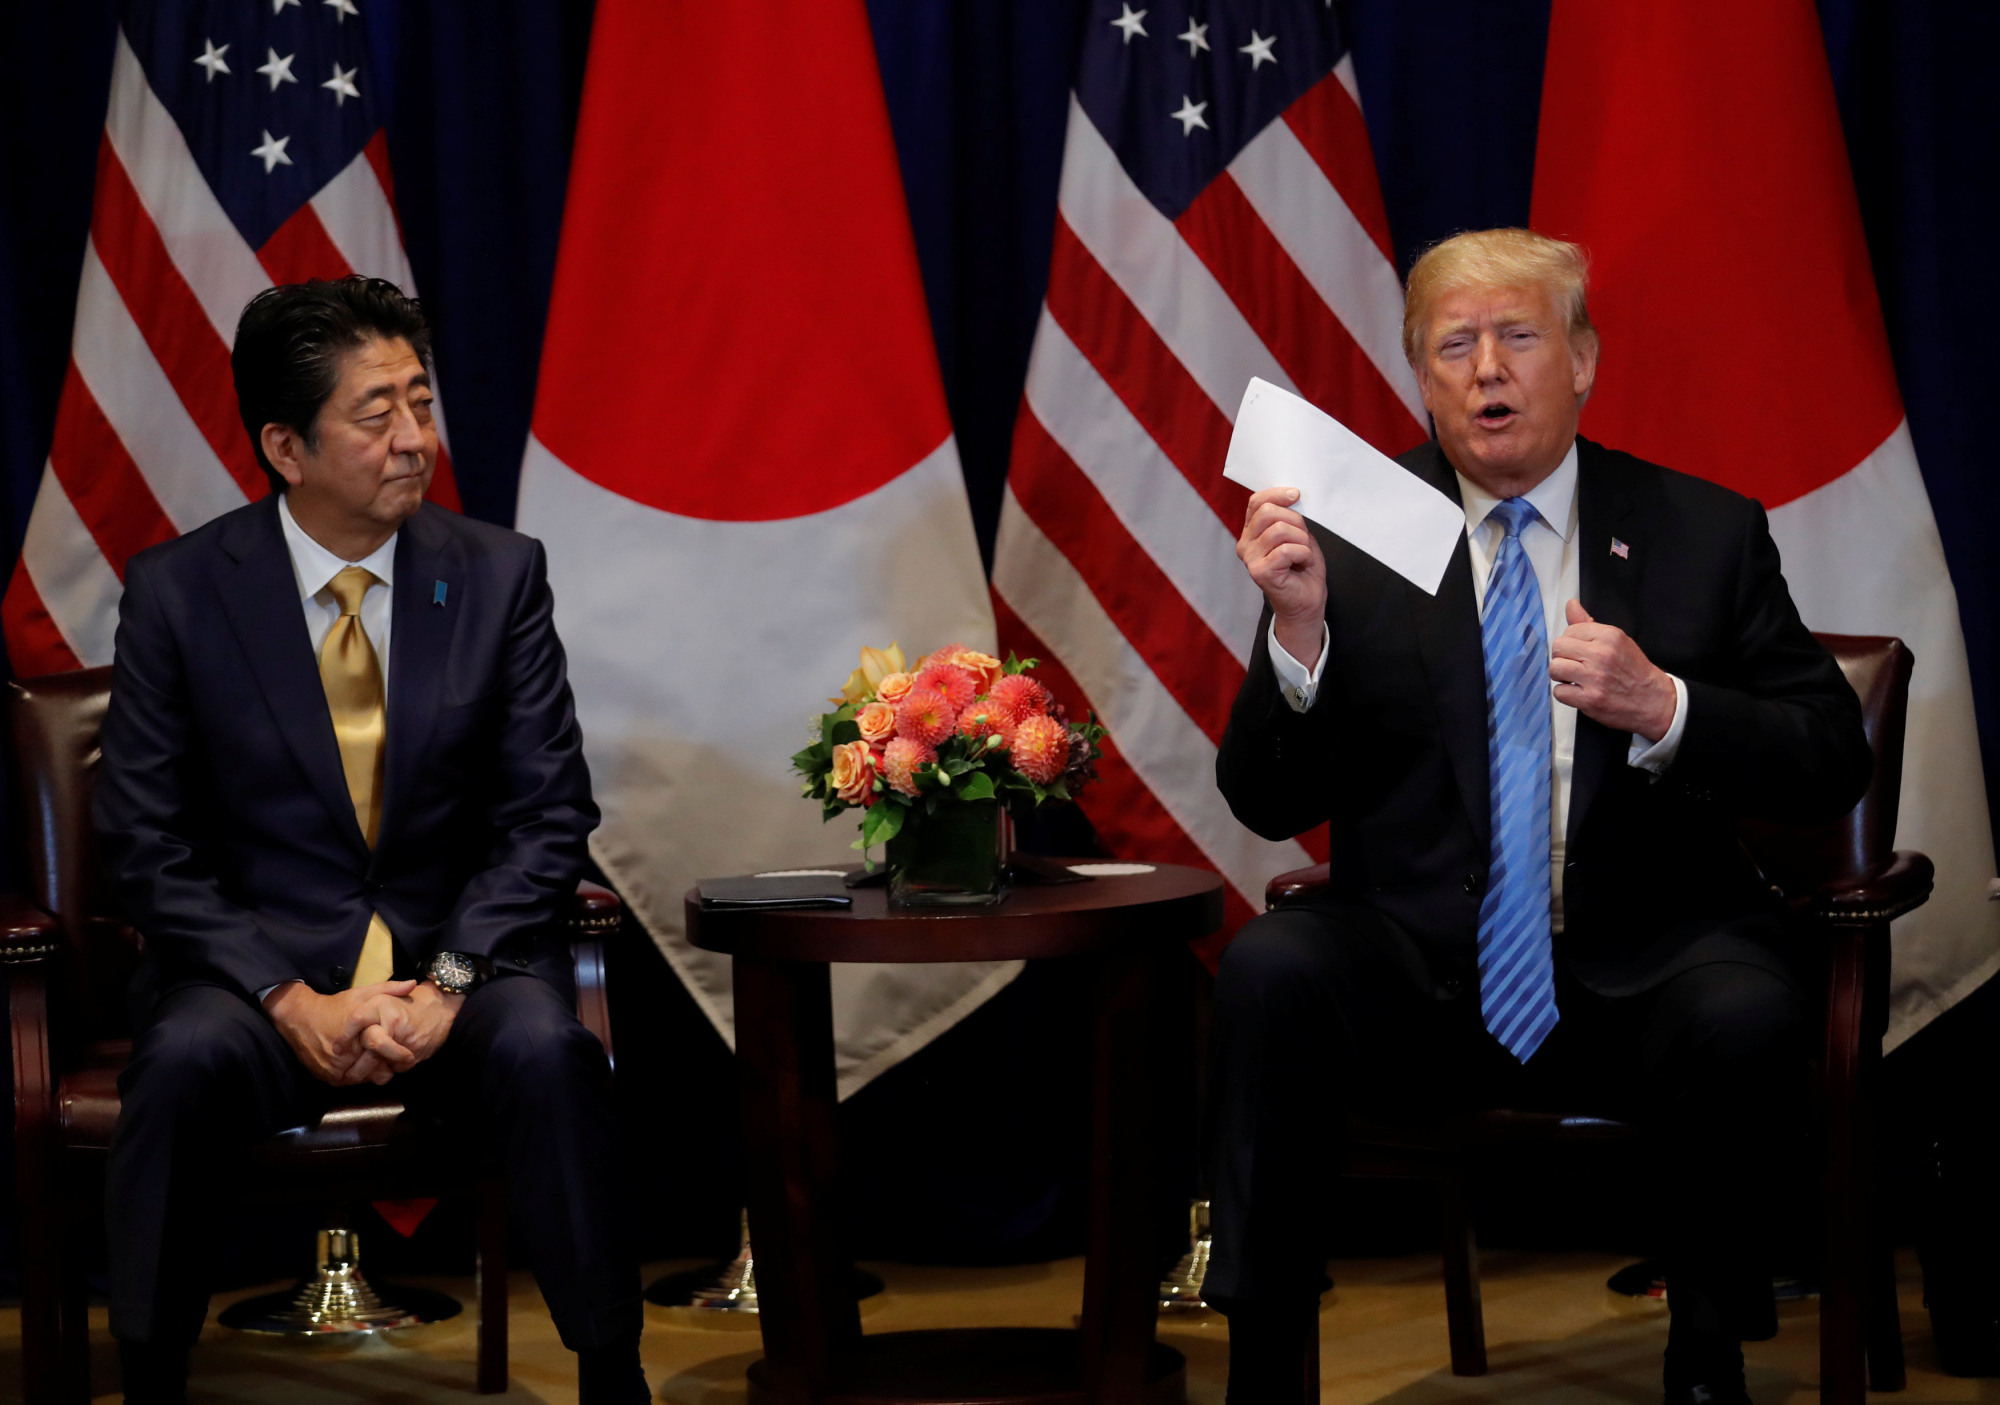 U.S. President Donald Trump shows a letter he said he received from North Korean leader Kim Jong Un, during a bilateral meeting with Prime Minister Shinzo Abe on the sidelines of the 73rd session of the United Nations General Assembly in New York on Sept. 26. | REUTERS